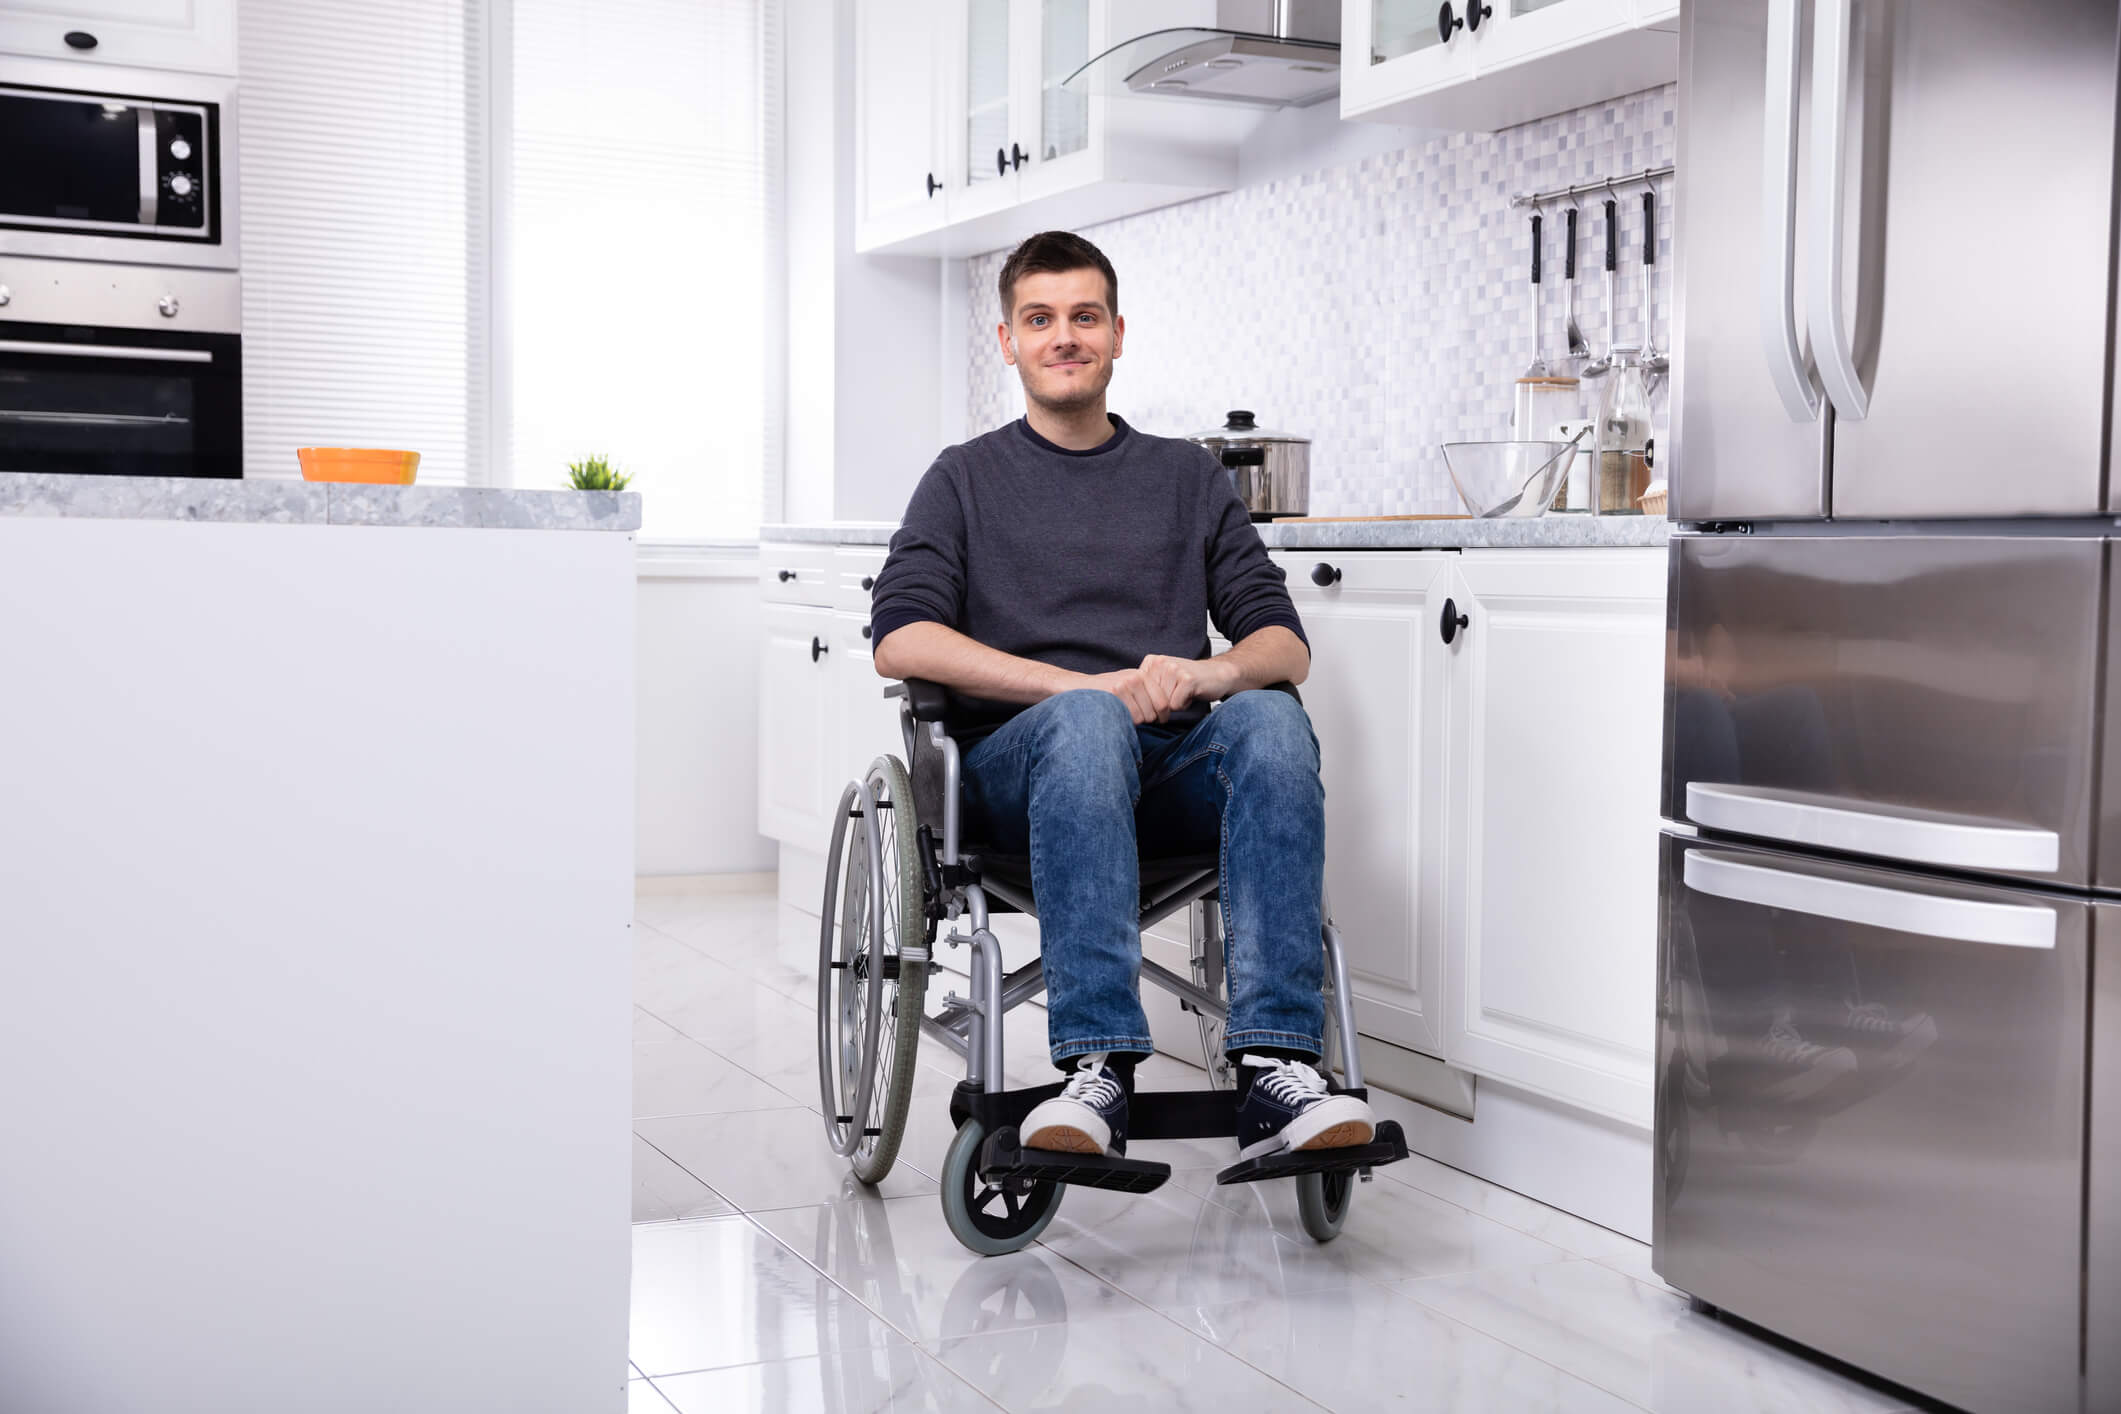 Creating an Accessible Home Environment